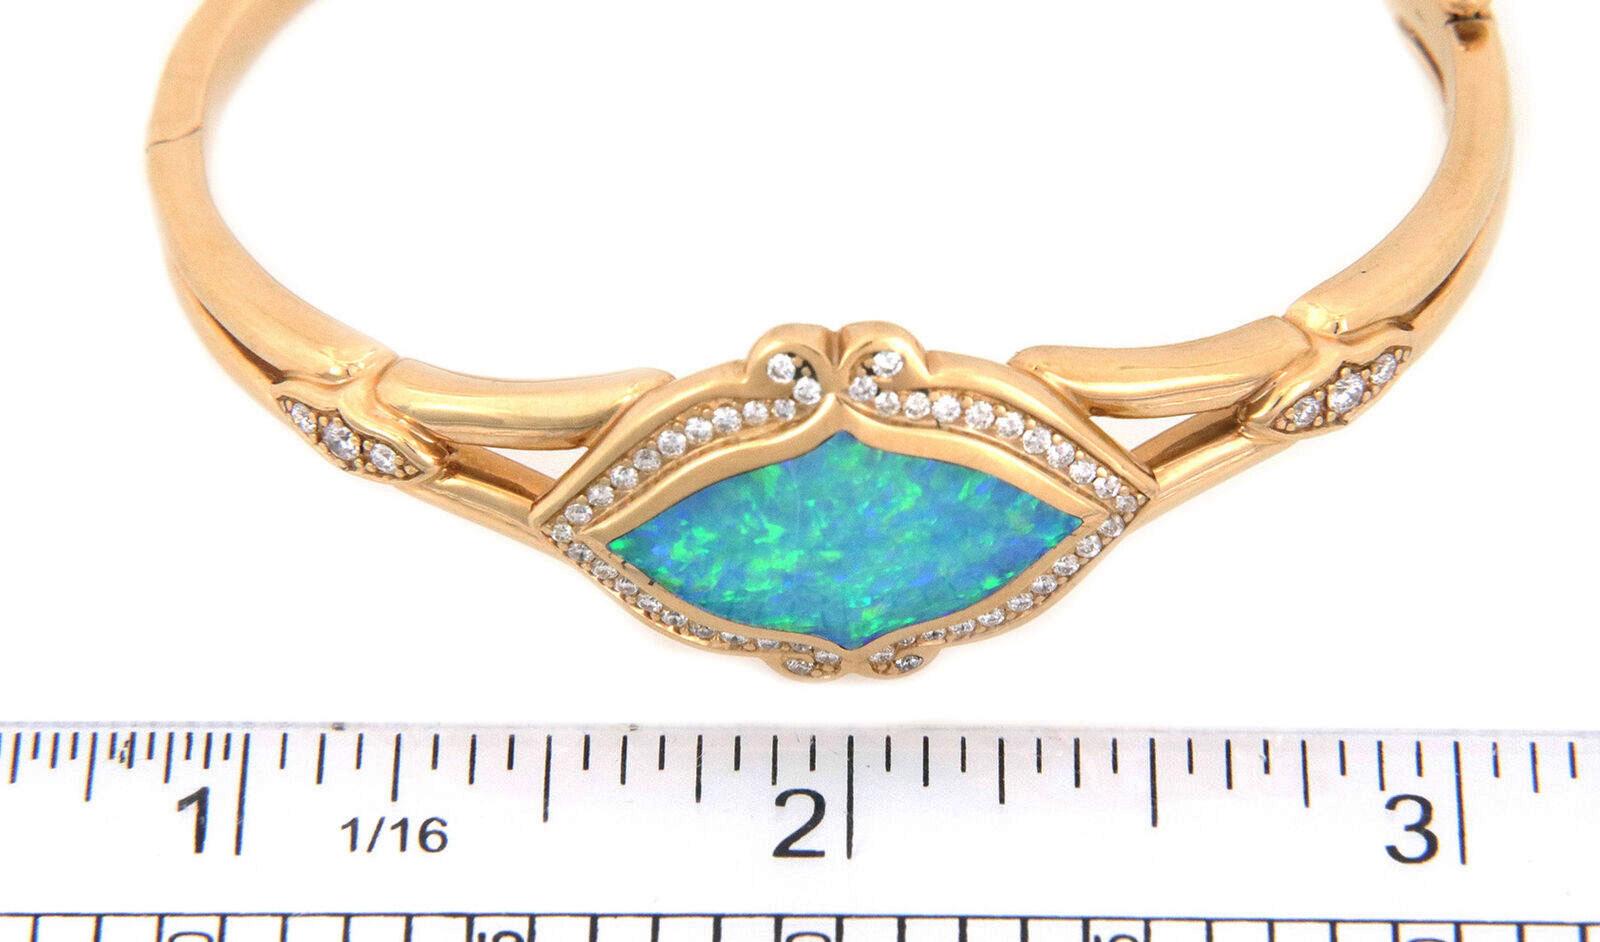 Kabana Diamond Star Opal 14k Yellow Gold Fancy Floral Motif Bangle In Excellent Condition For Sale In Boca Raton, FL